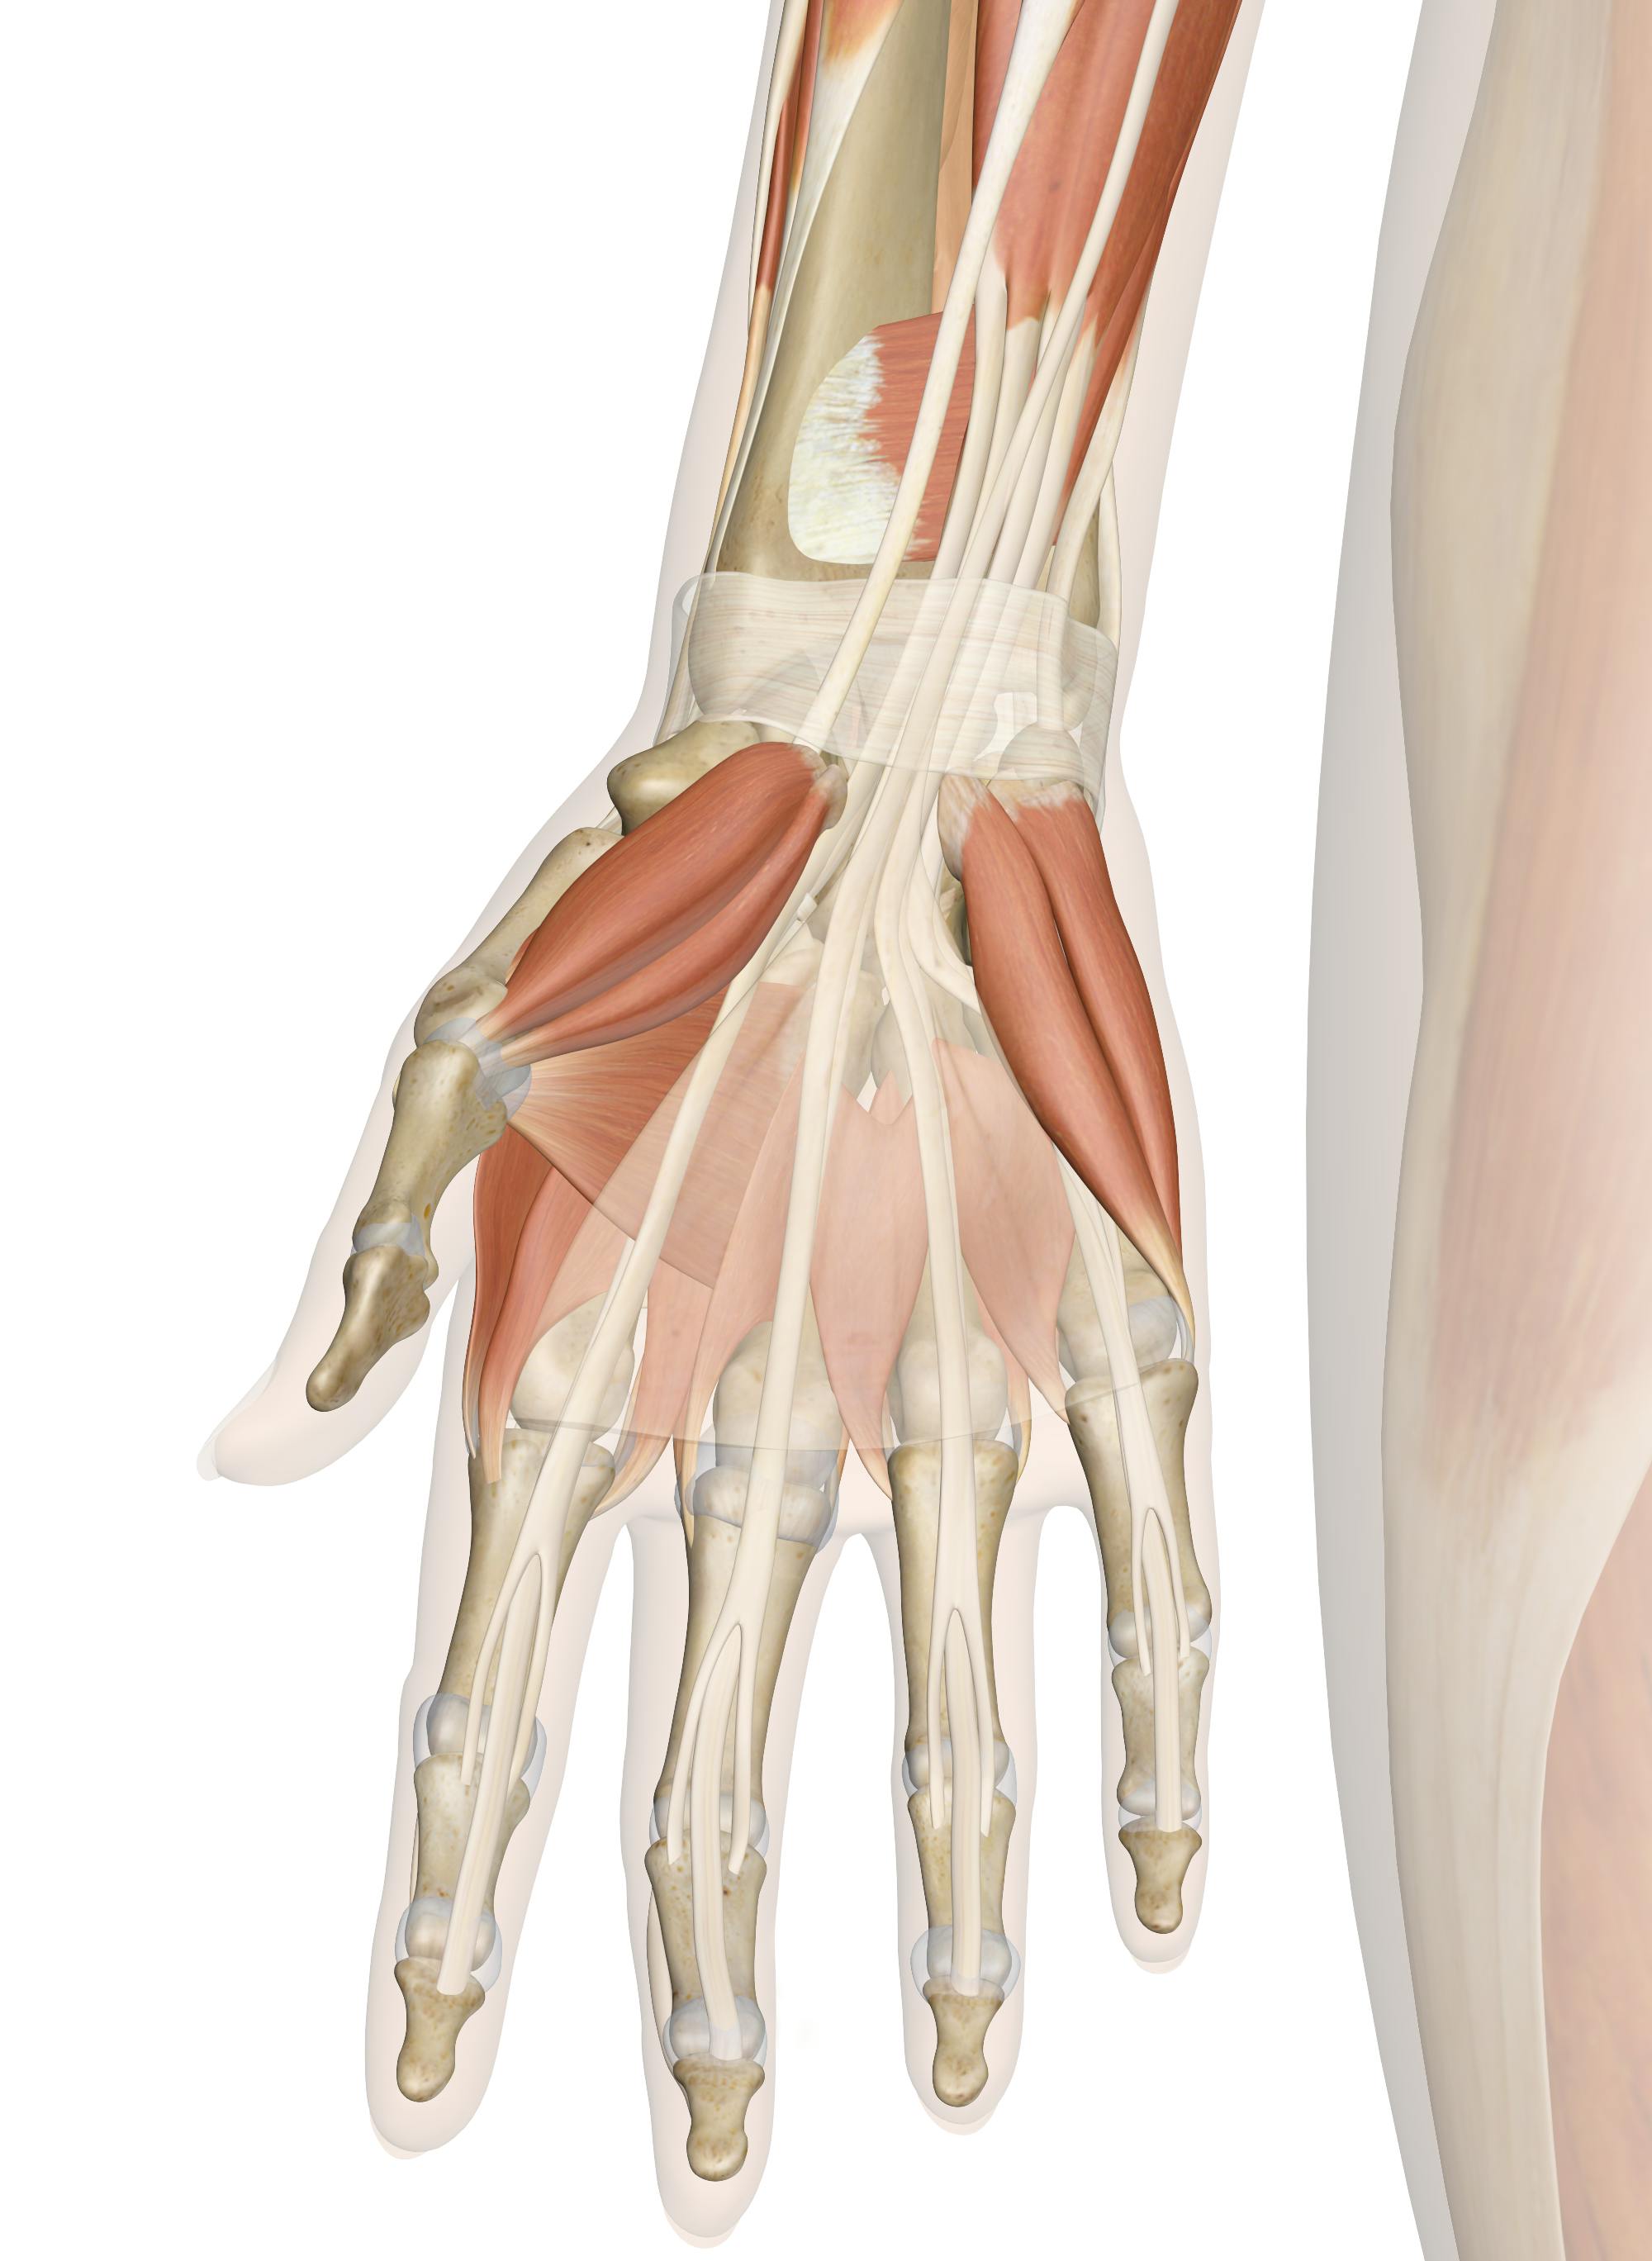 Muscles of the Hand and Wrist | Interactive Anatomy Guide